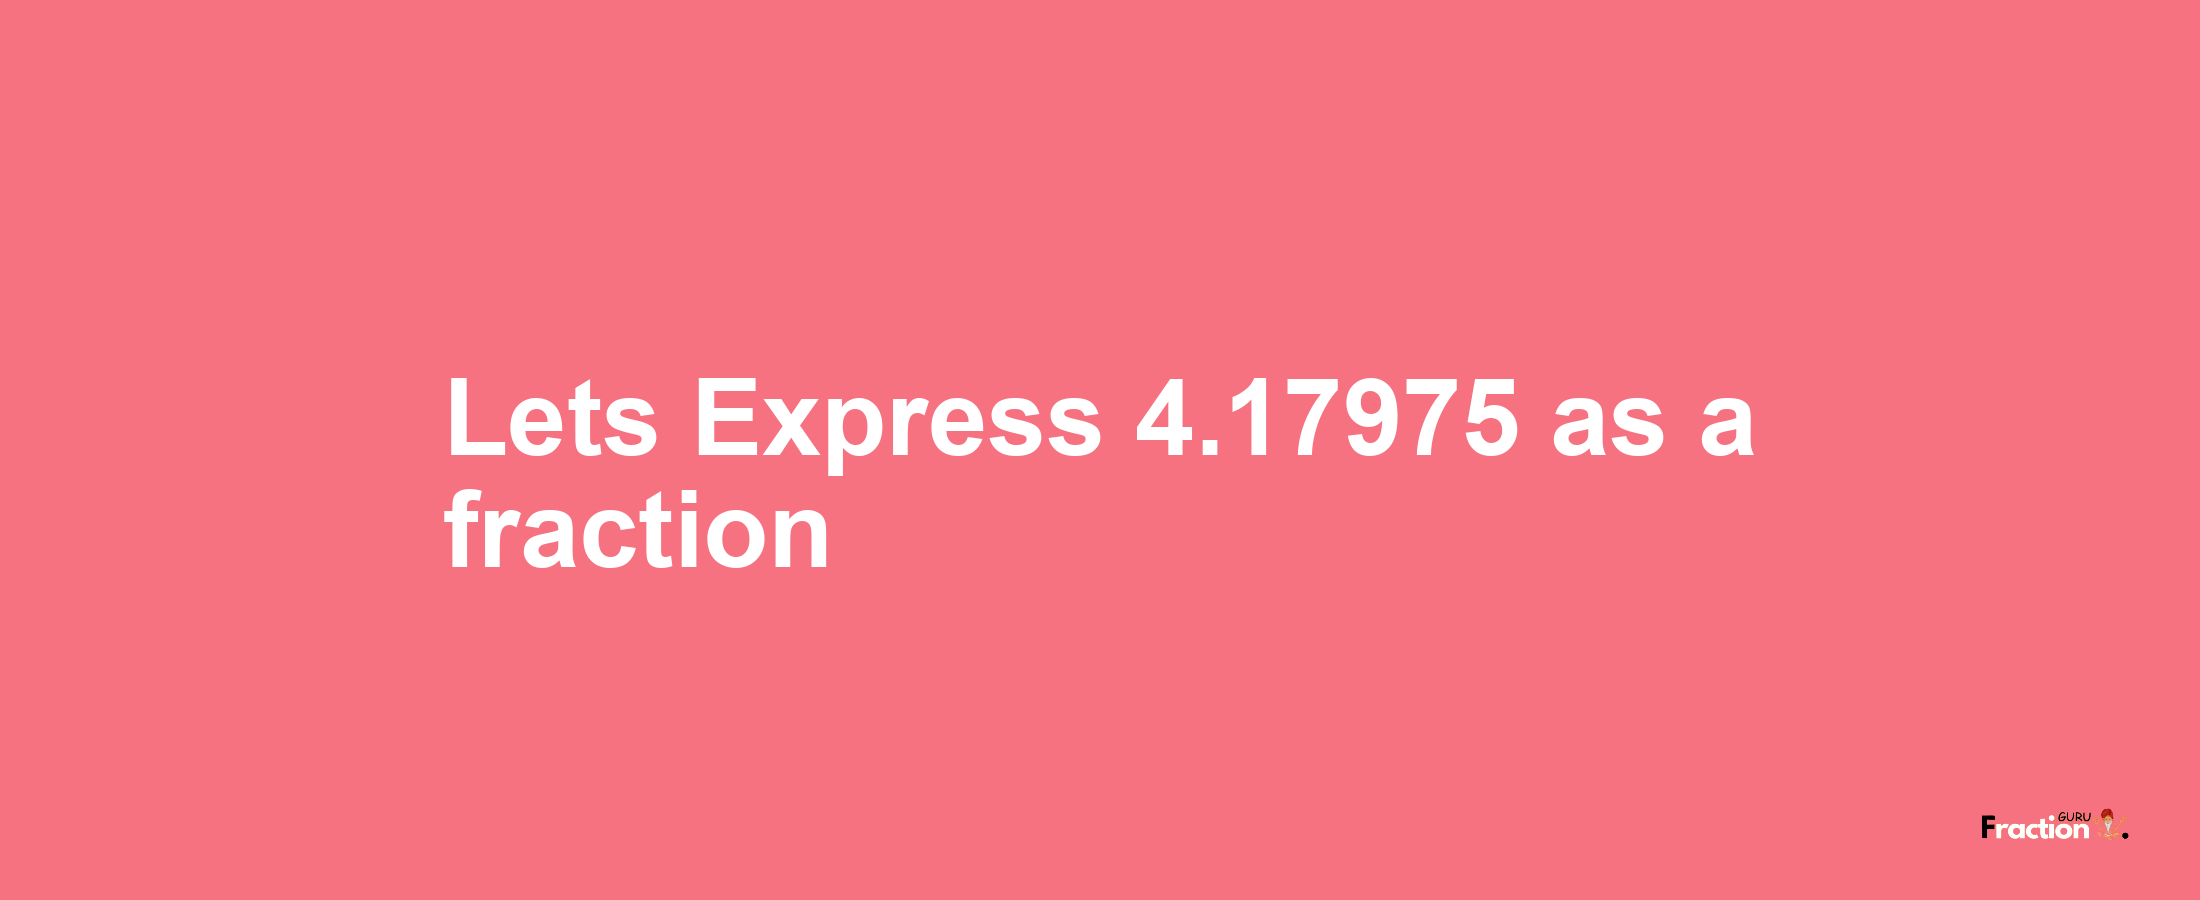 Lets Express 4.17975 as afraction